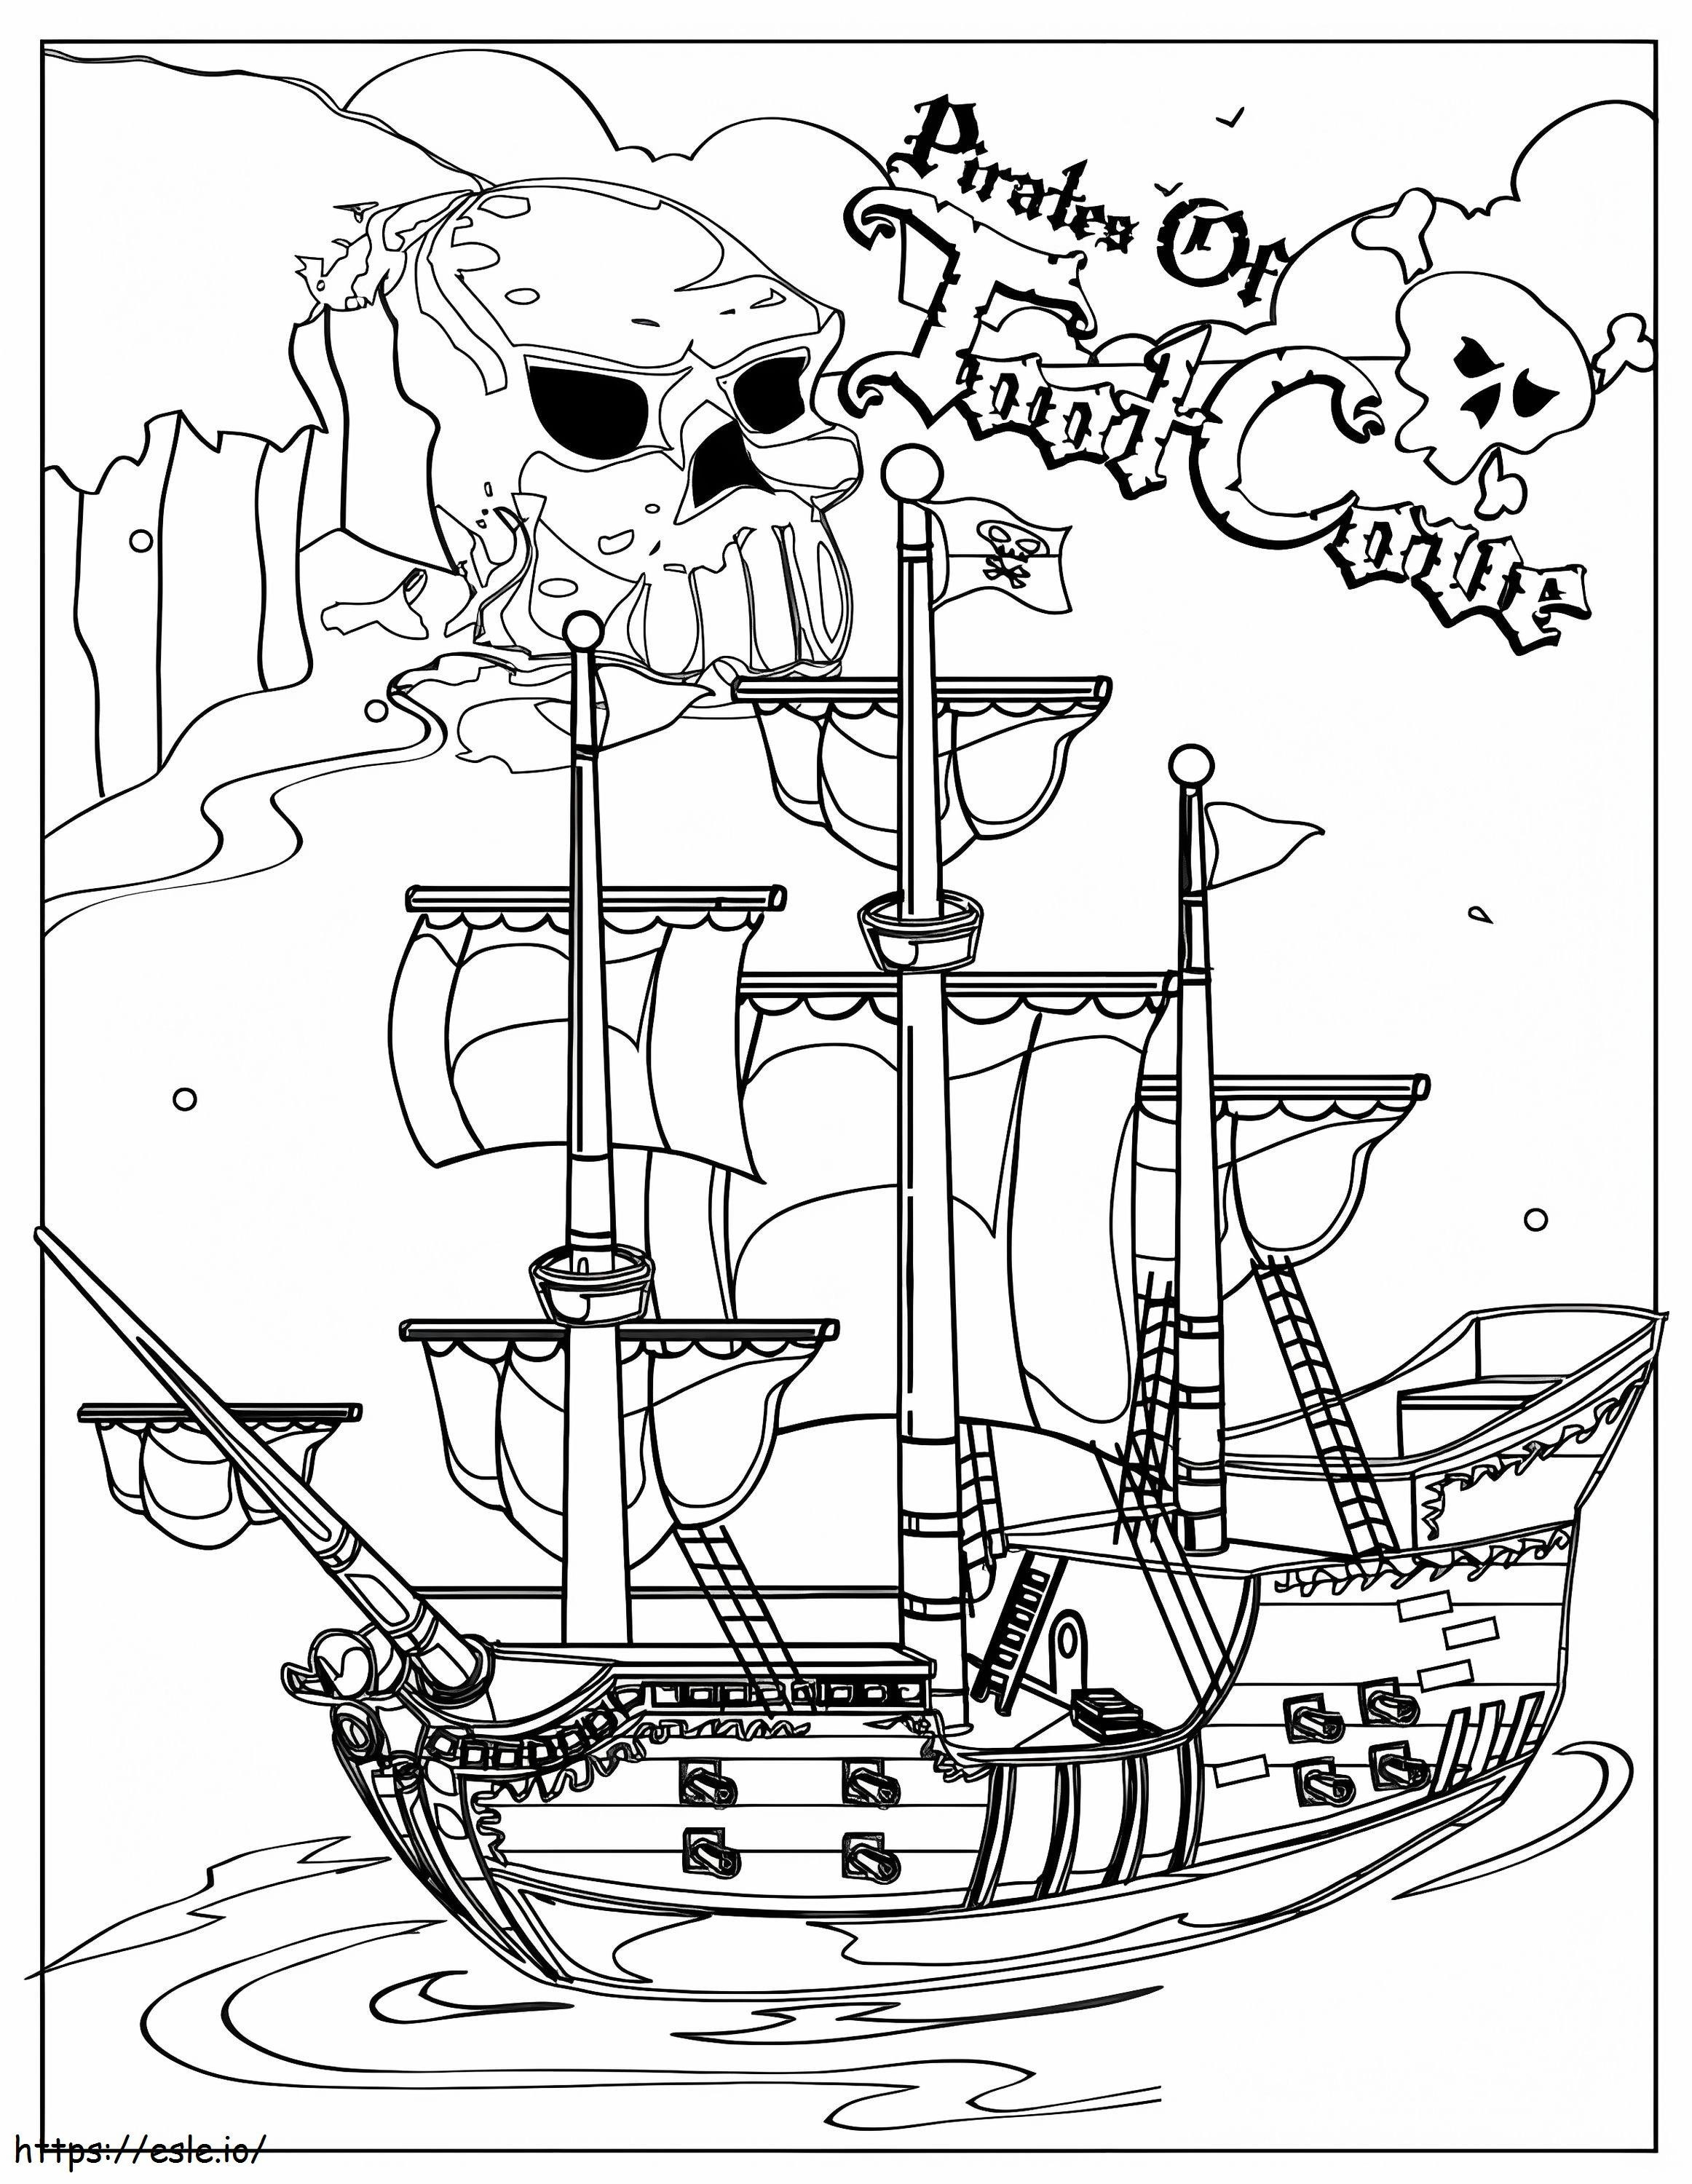 Pirate Ship Coloring Page 2 coloring page